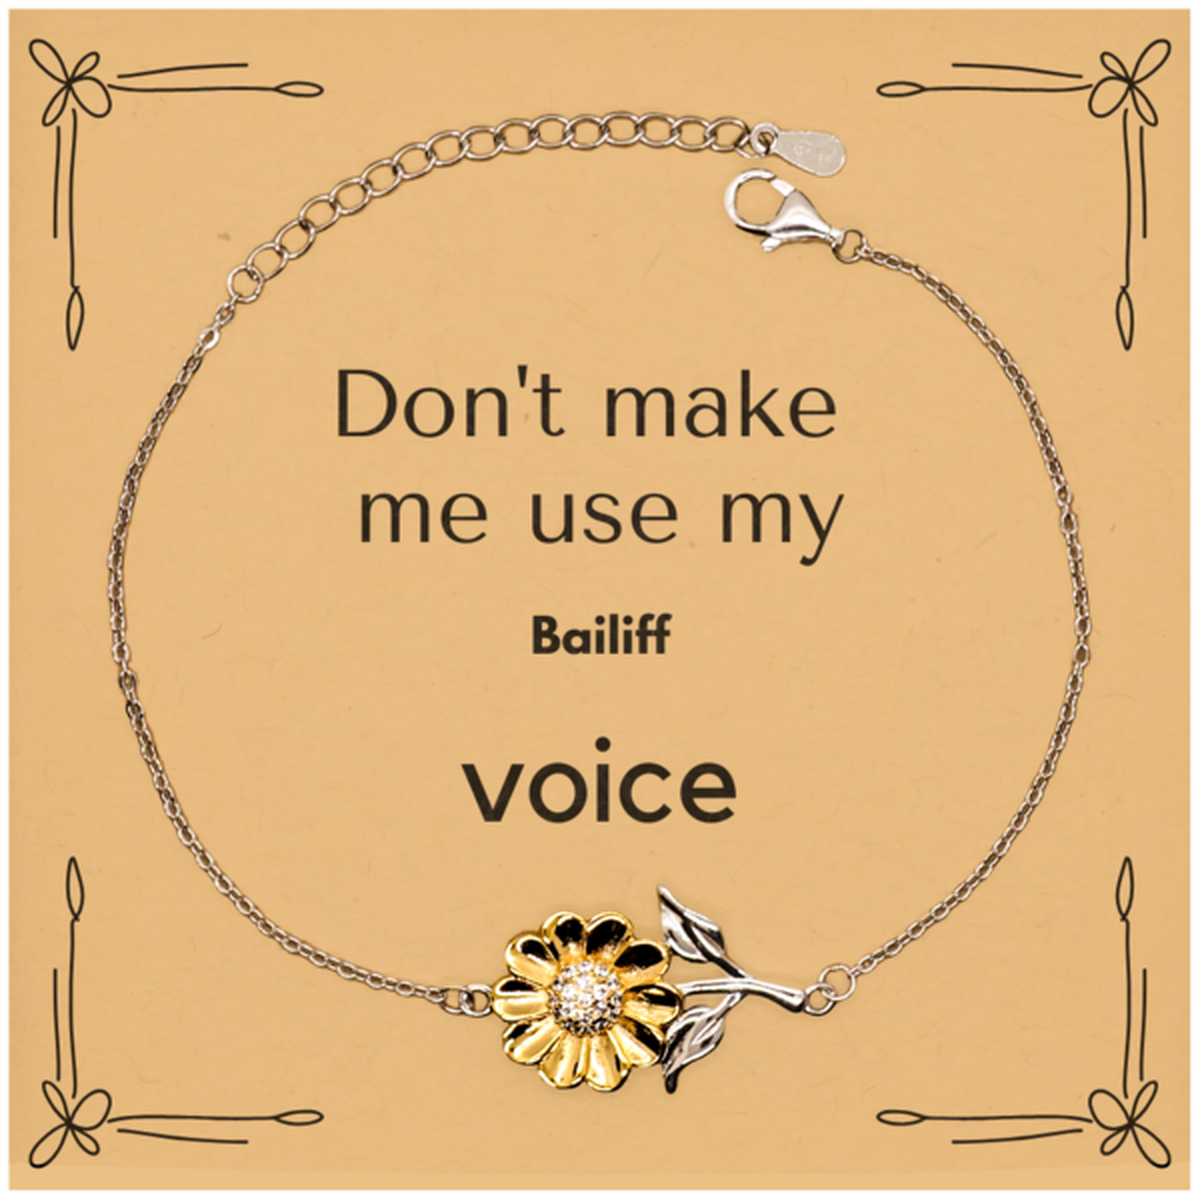 Don't make me use my Bailiff voice, Sarcasm Bailiff Card Gifts, Christmas Bailiff Sunflower Bracelet Birthday Unique Gifts For Bailiff Coworkers, Men, Women, Colleague, Friends